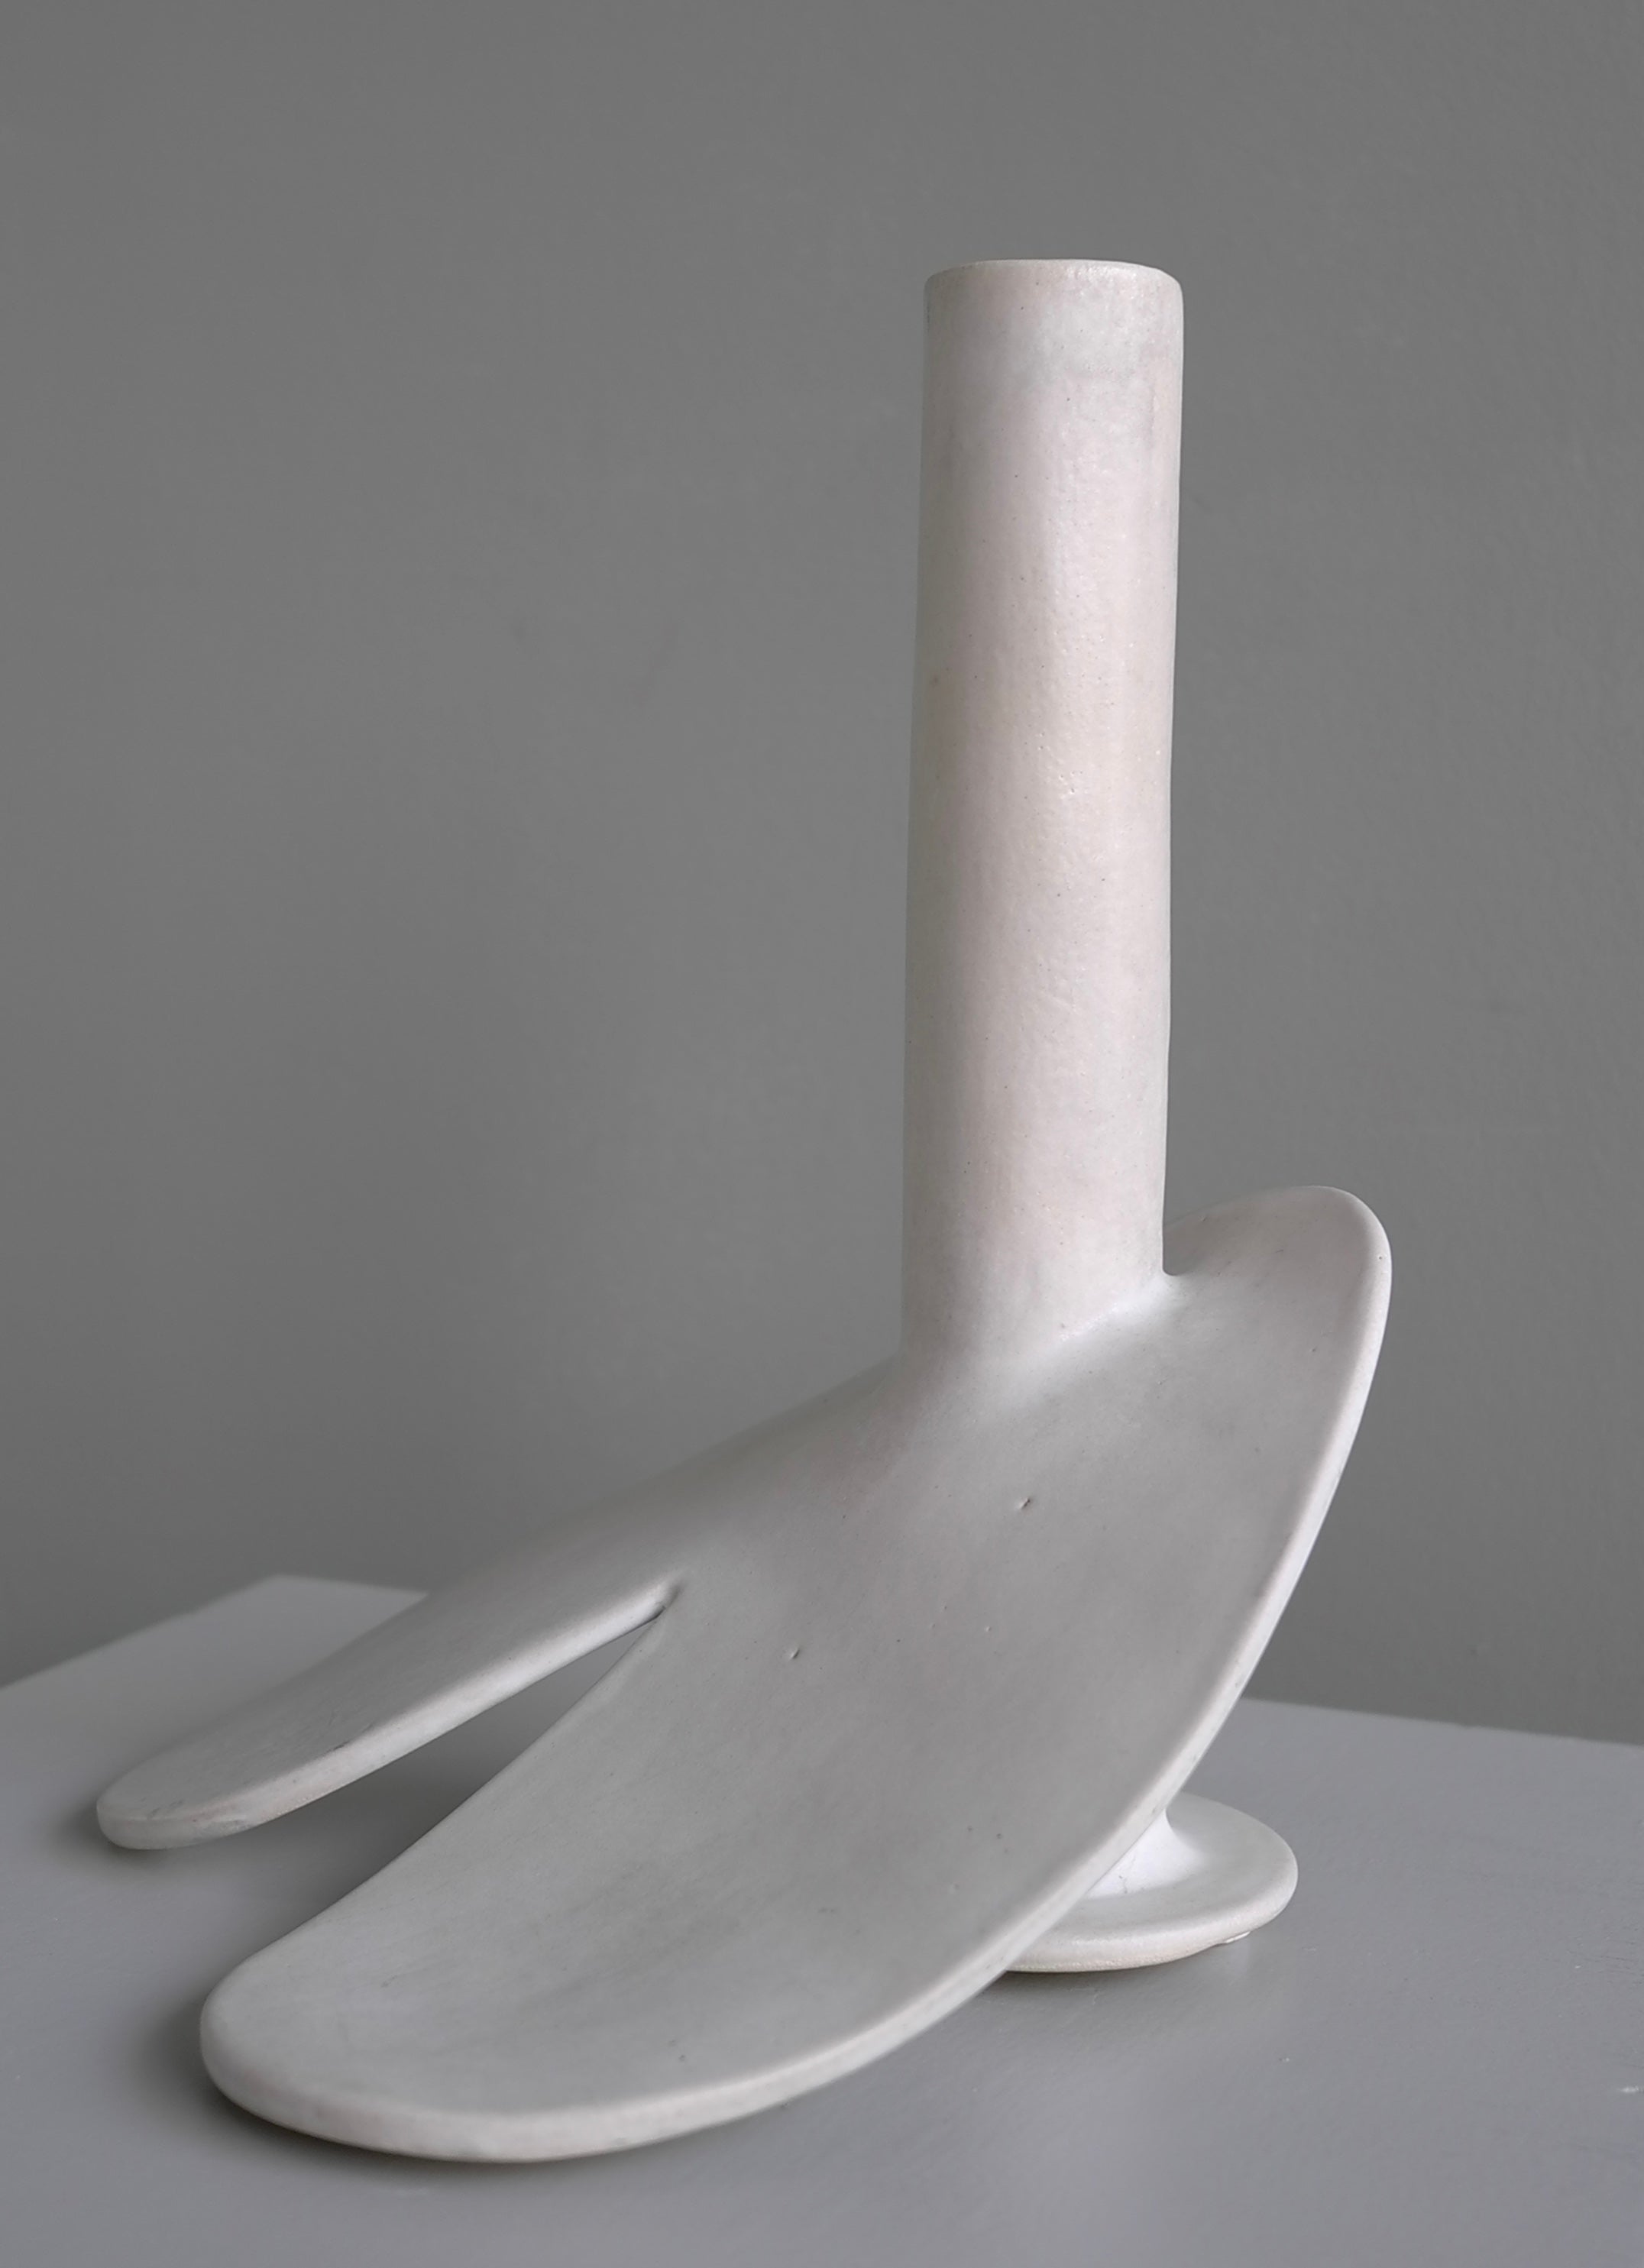 Abstract Mid-Century Modern White Glazed Phallus Sculpture, Dated and signed by unknown Artist, The Netherlands 1976. 